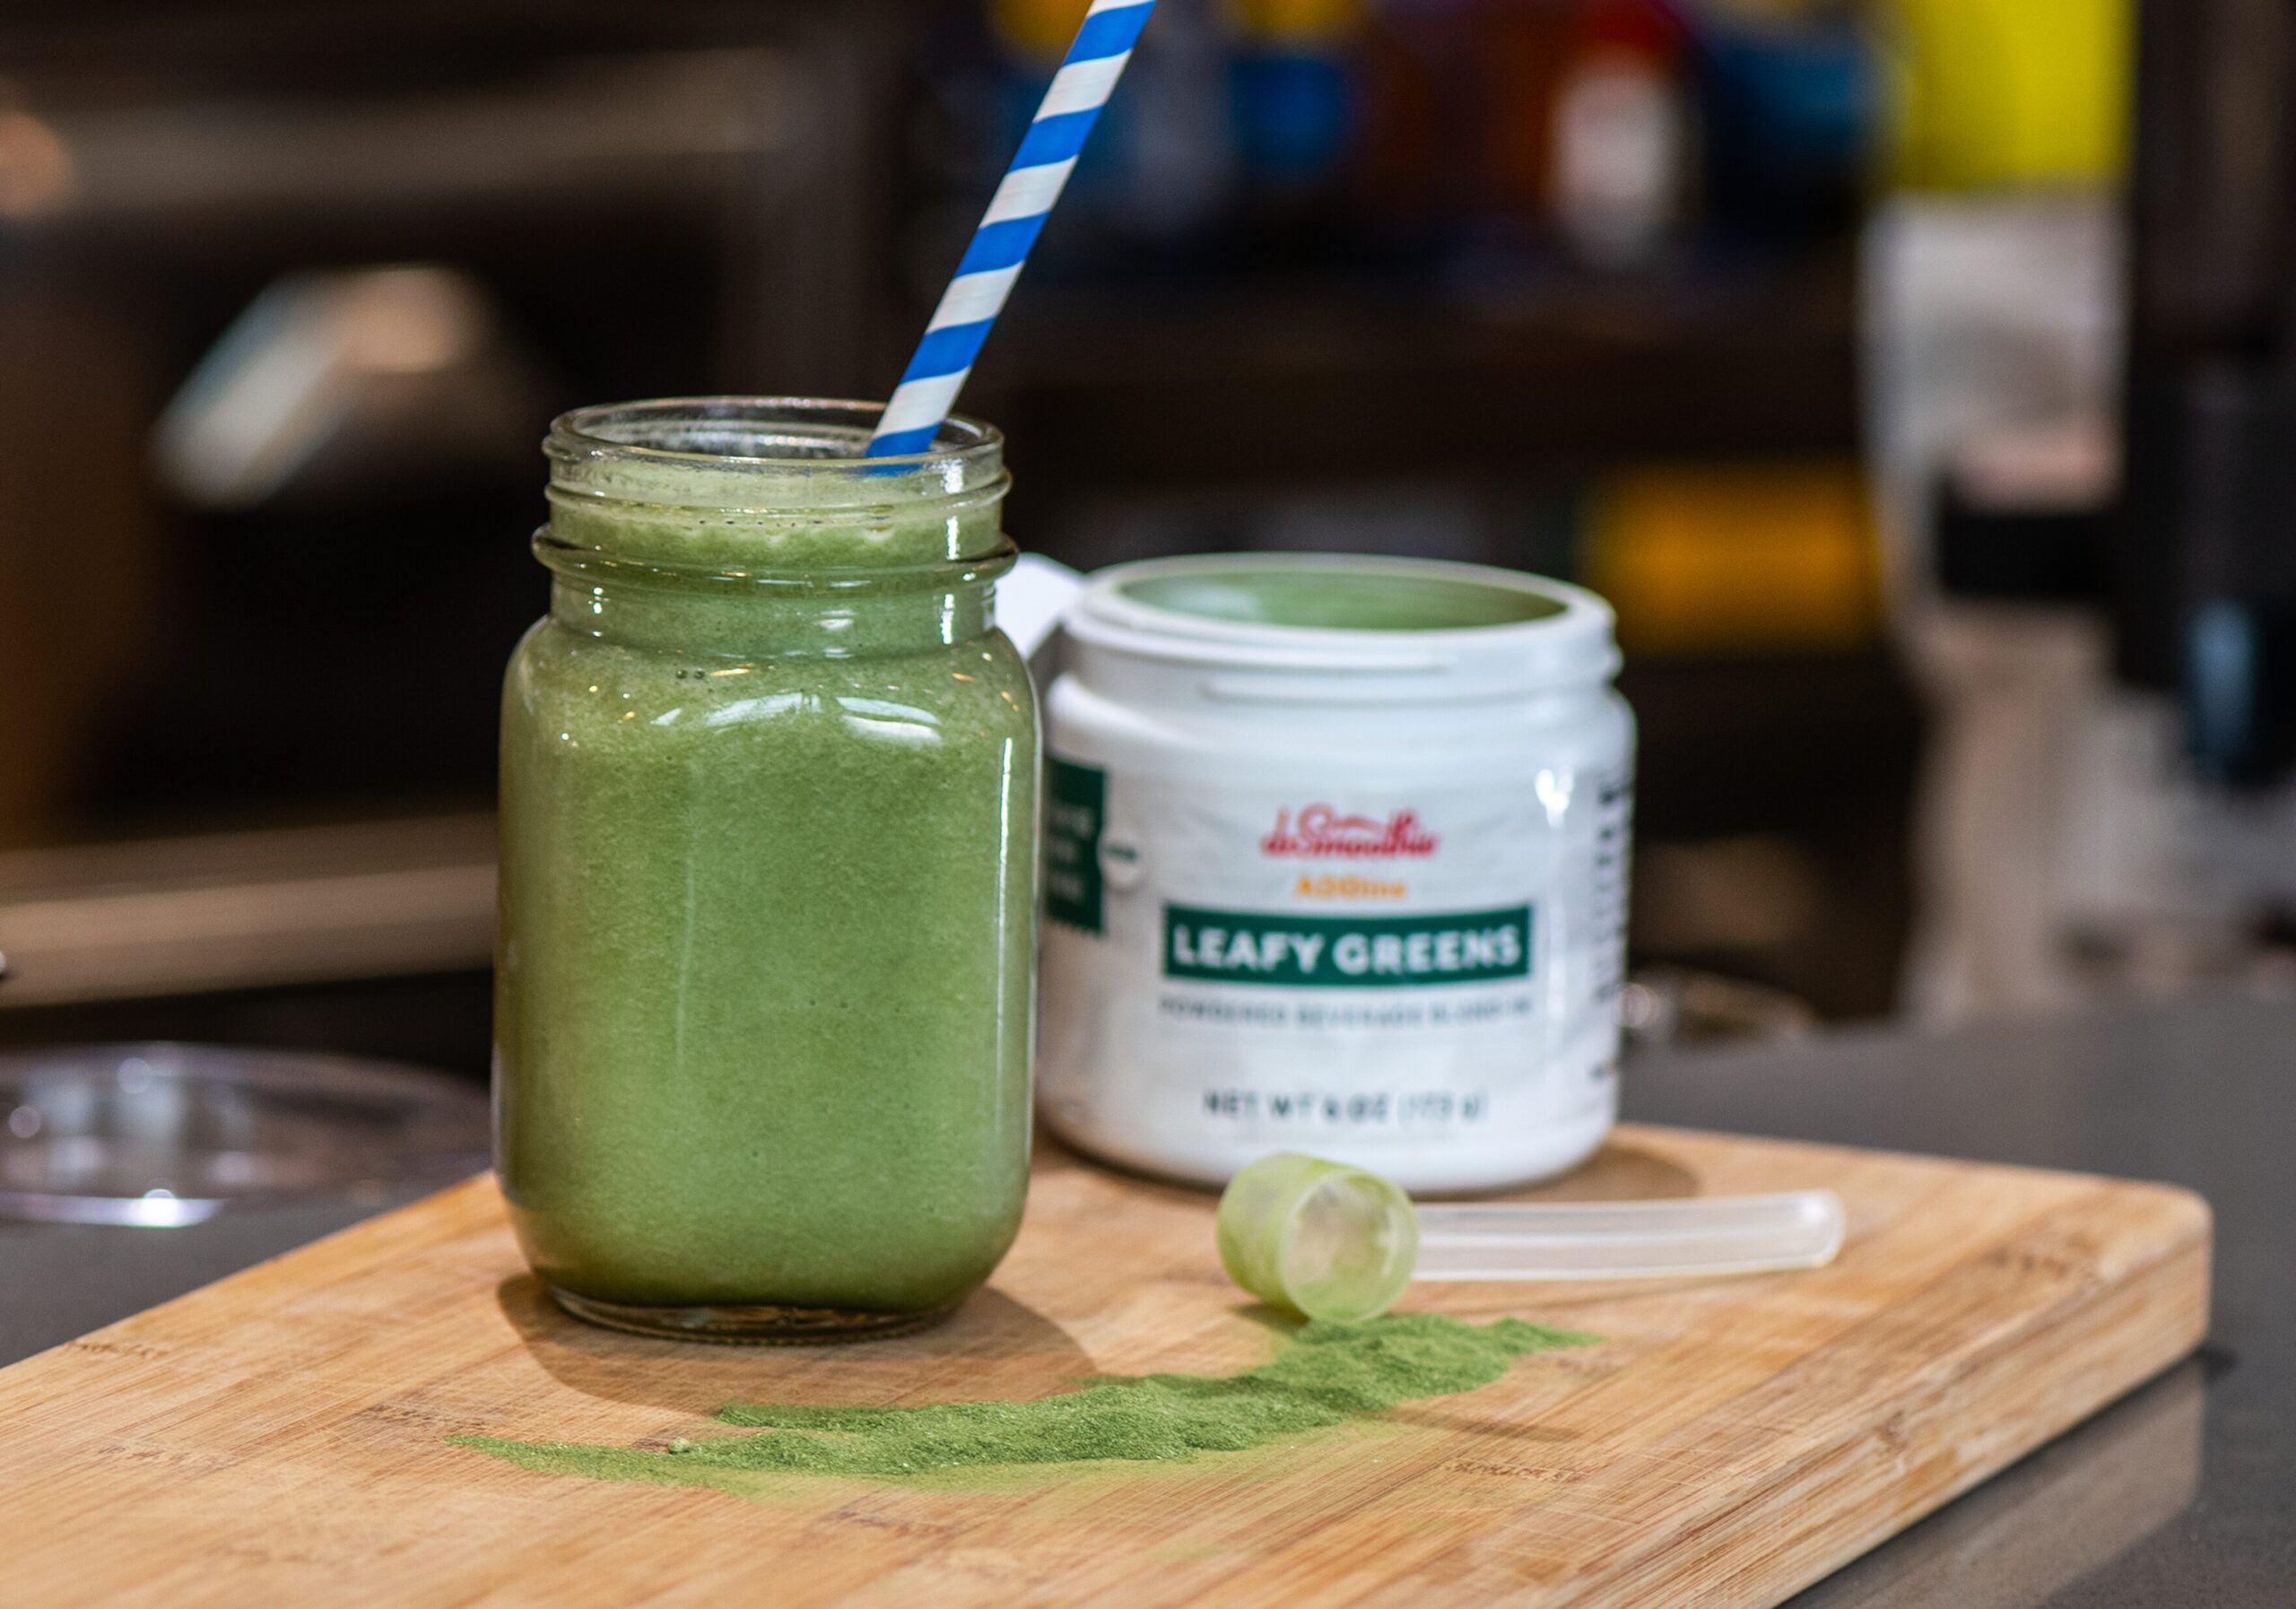 Healthy green smoothie with Dr.Smoothie Leafy Greens. 